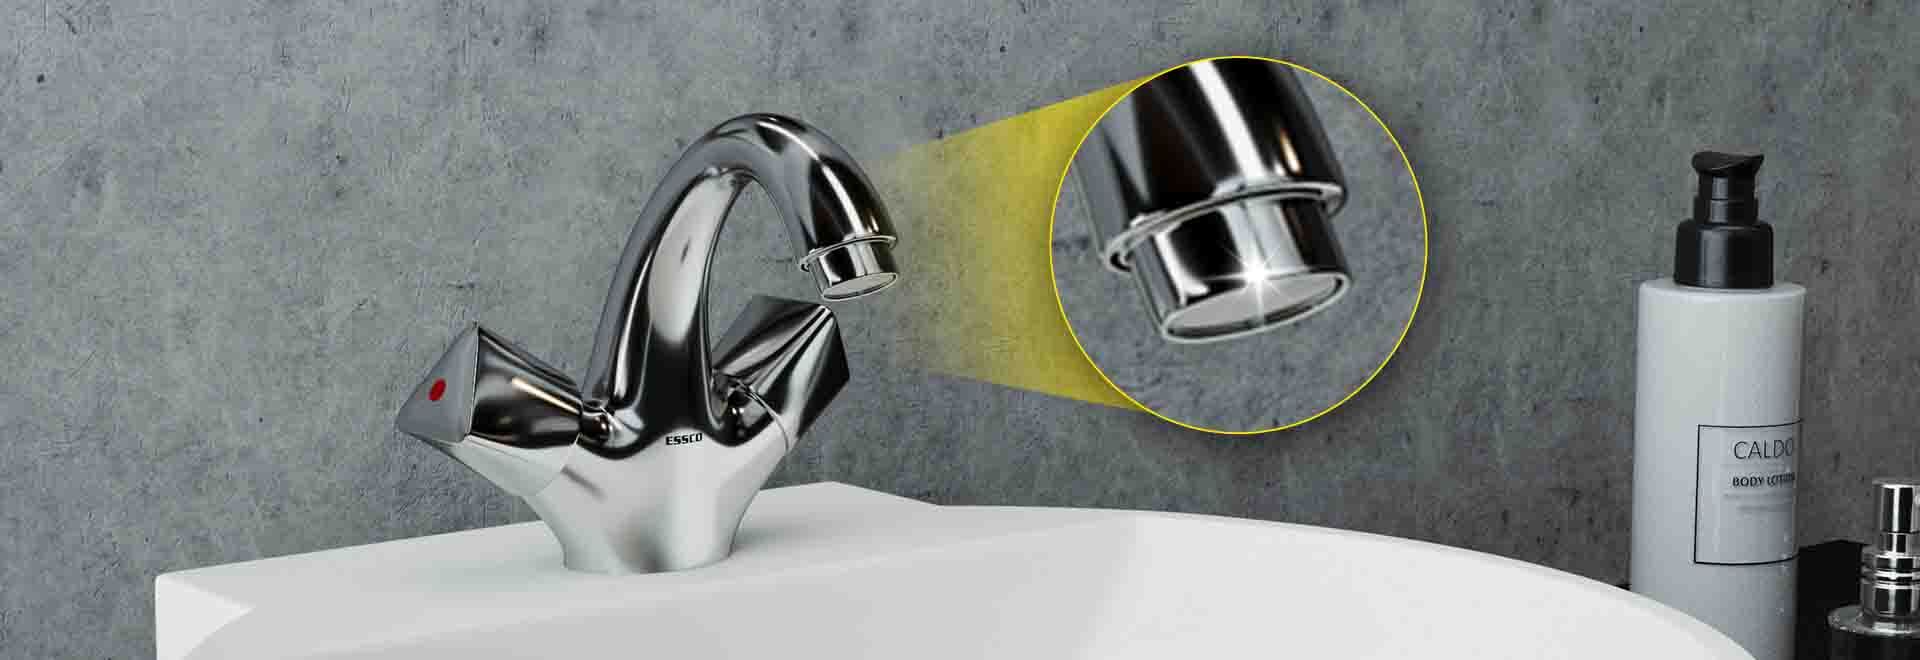 7 Benefits of Cleaning and Updating Water Faucet Aerators